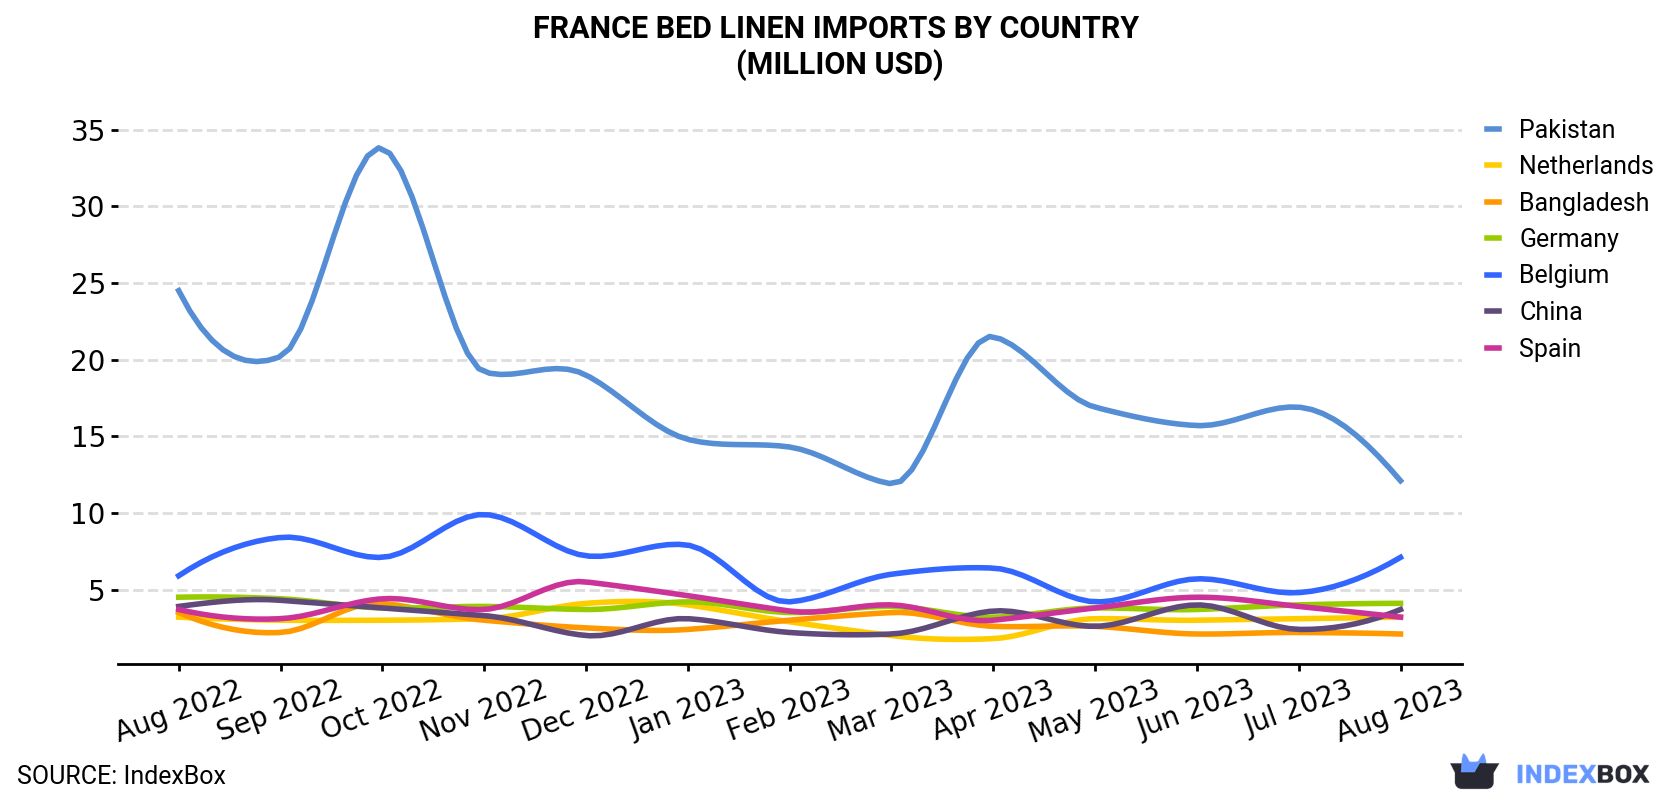 France Bed Linen Imports By Country (Million USD)